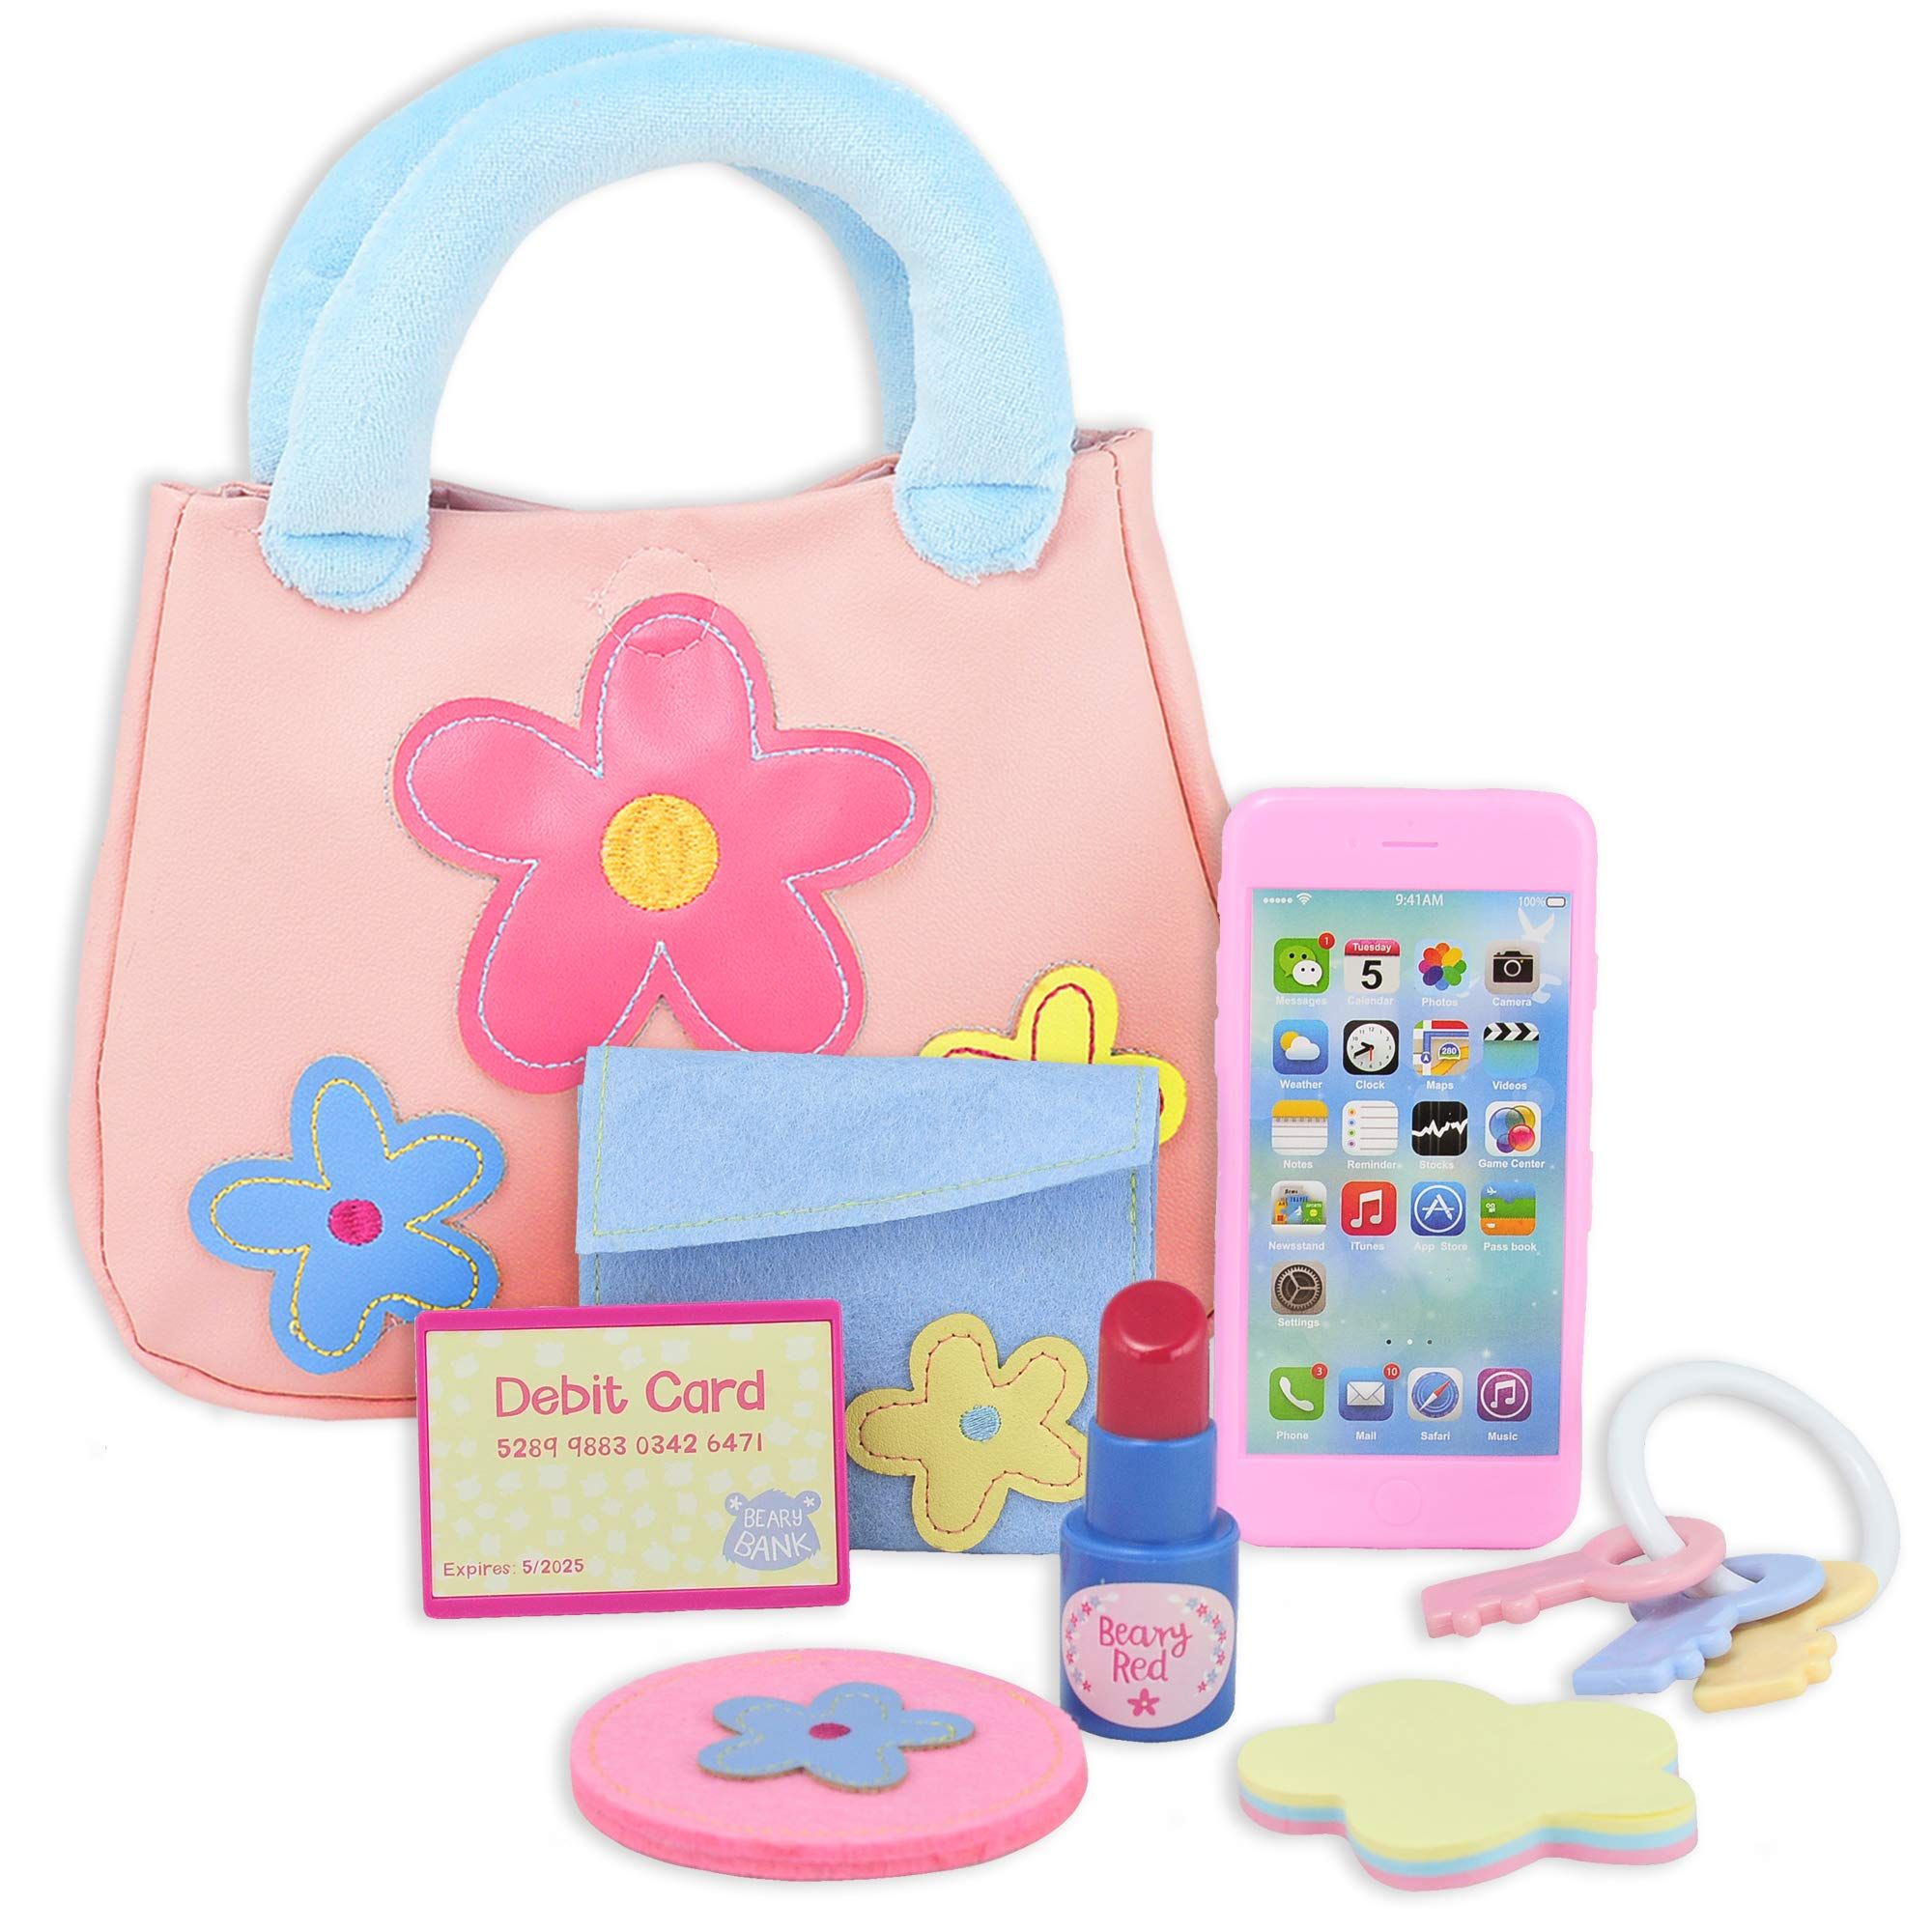 My Beary First Purse 9-Piece Gift Set - Includes Purse, Storybook, and Accessories - Great Preten... | Amazon (US)